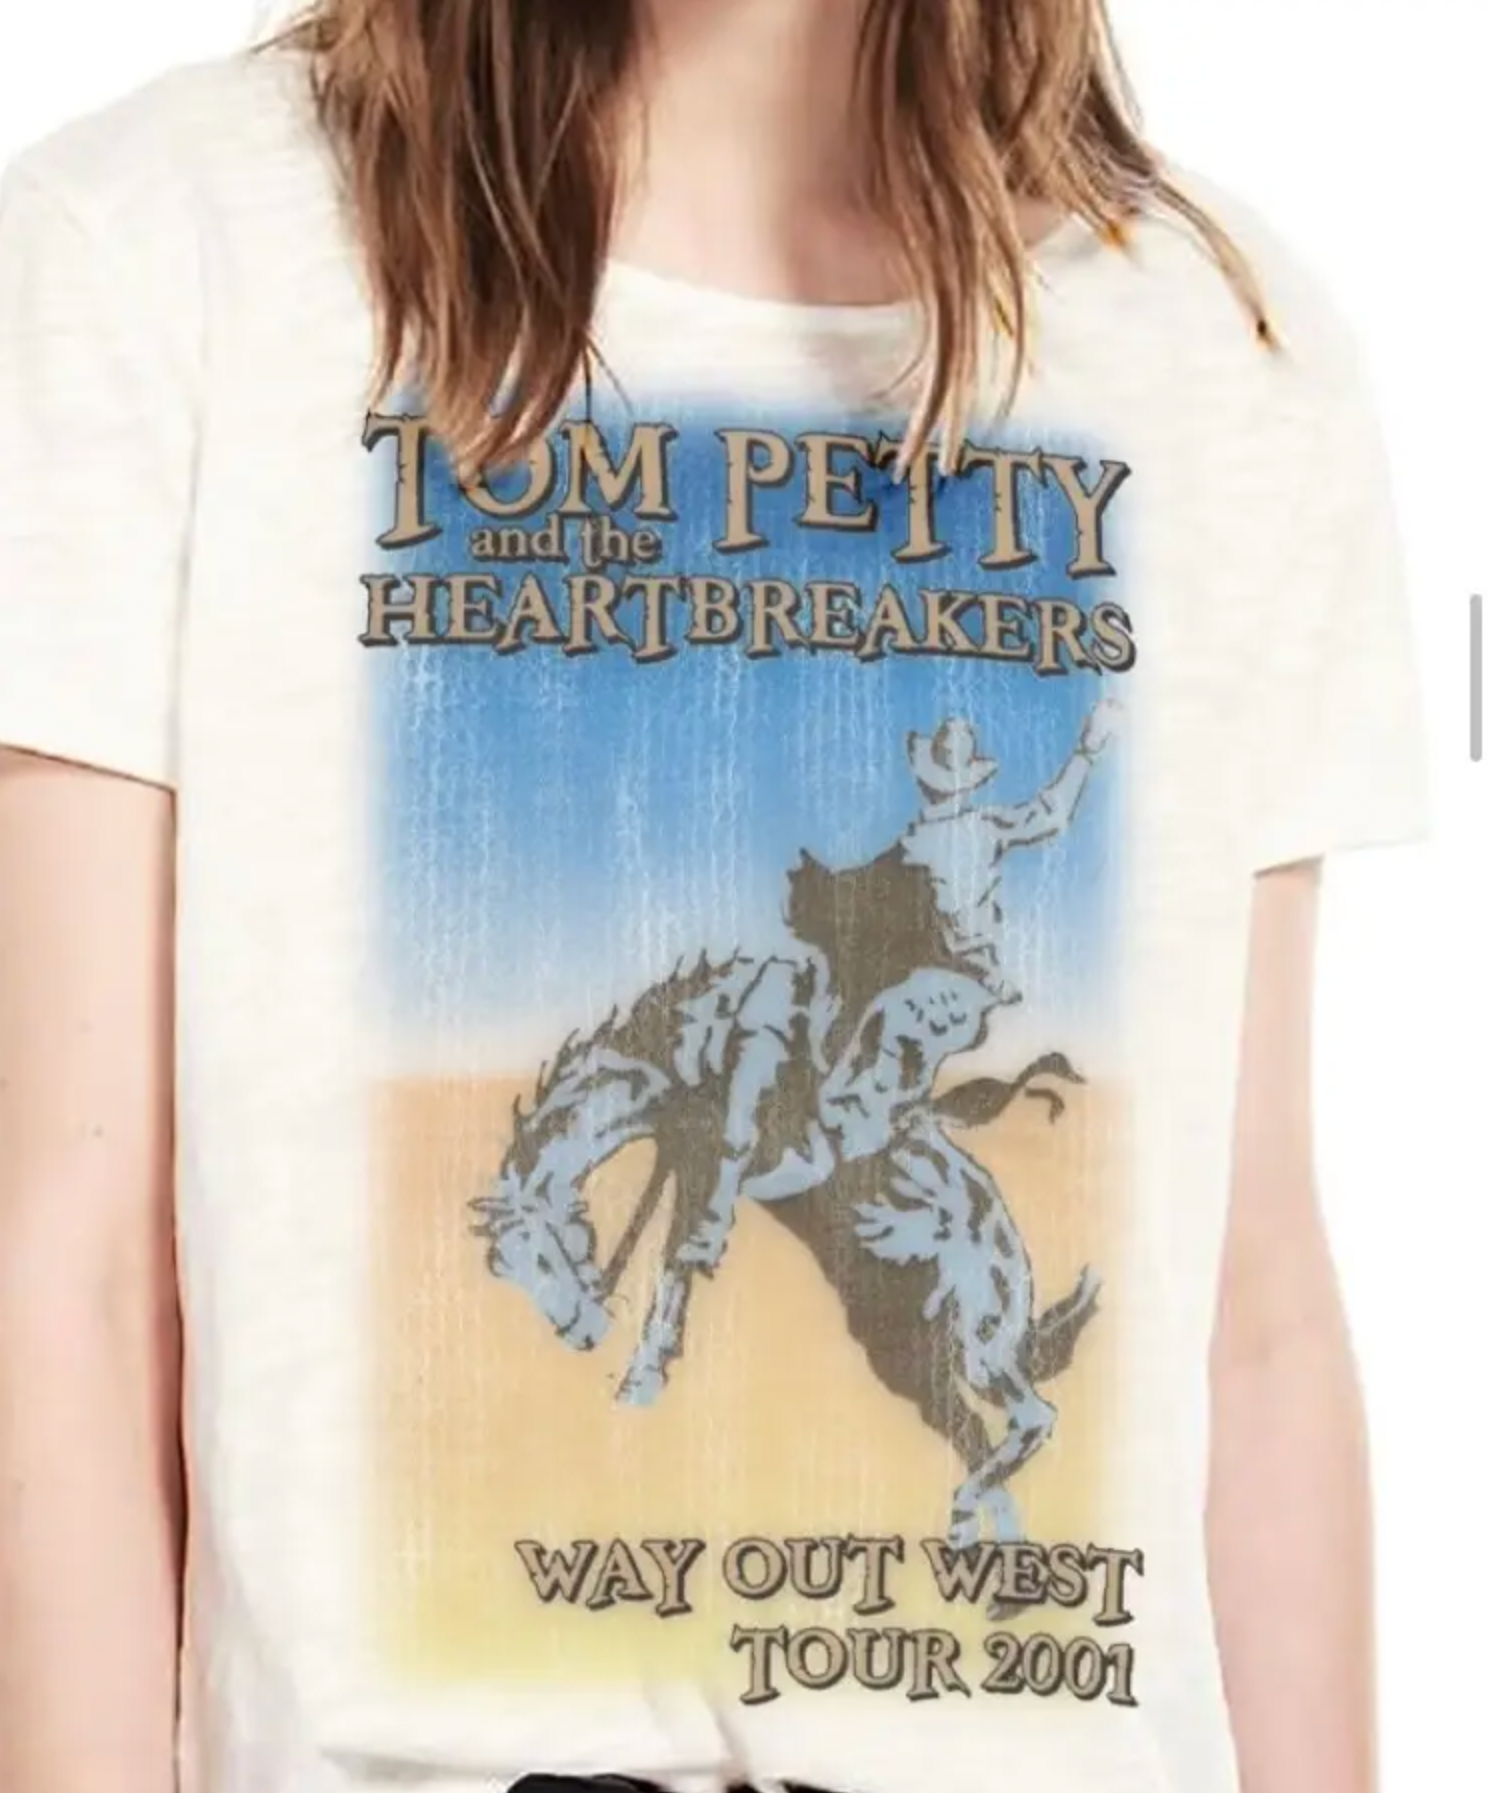 PPCTPWTw Prince Peter Tom Petty Western Tee